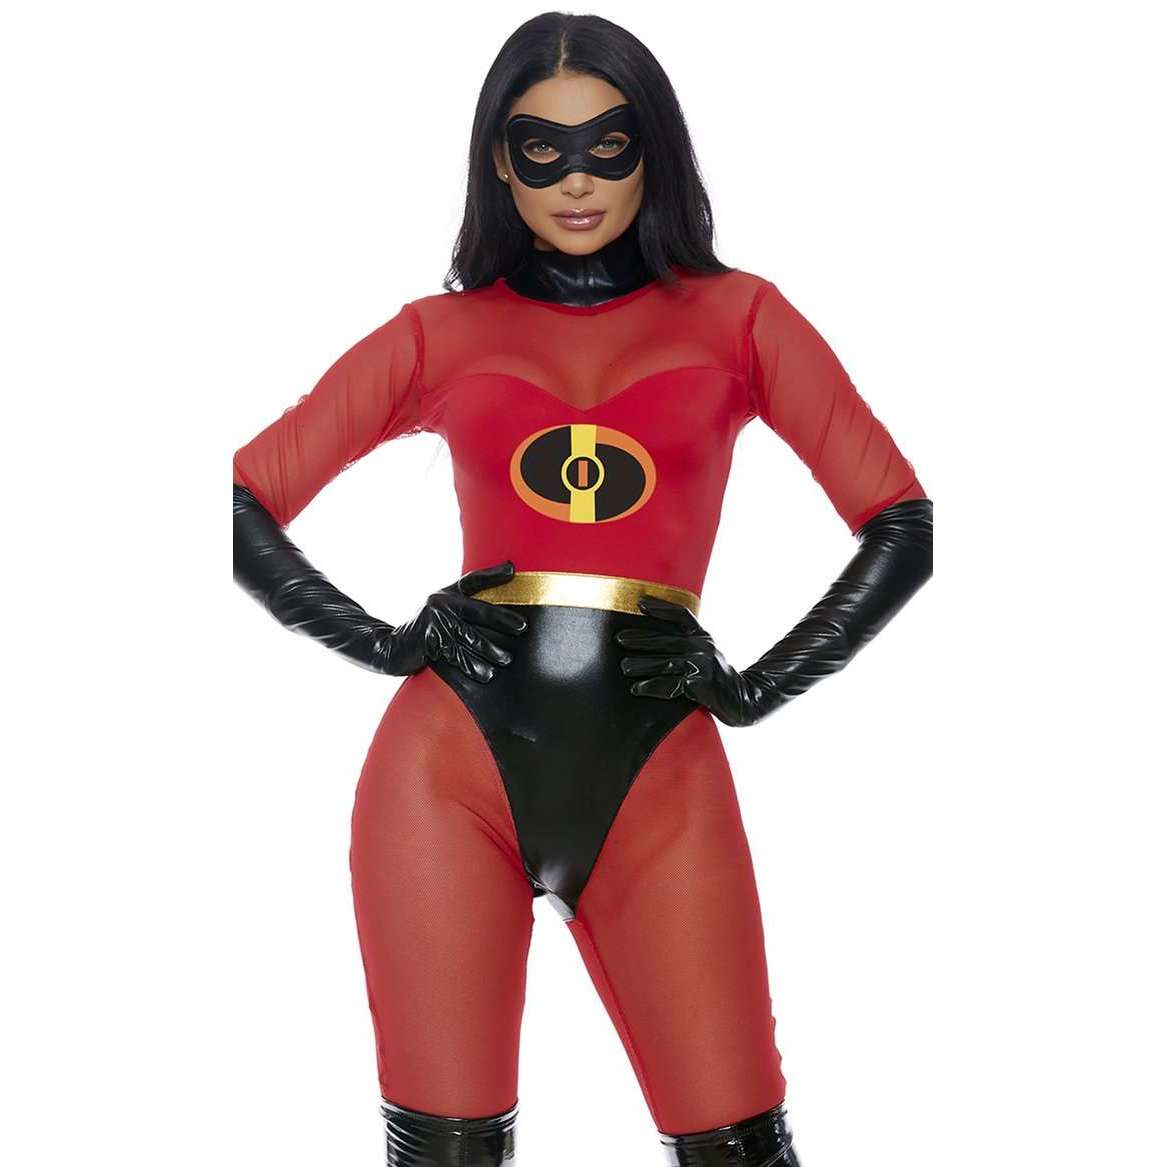 Iconic Incredible Super Suit Movie Character Women's Adult Costume